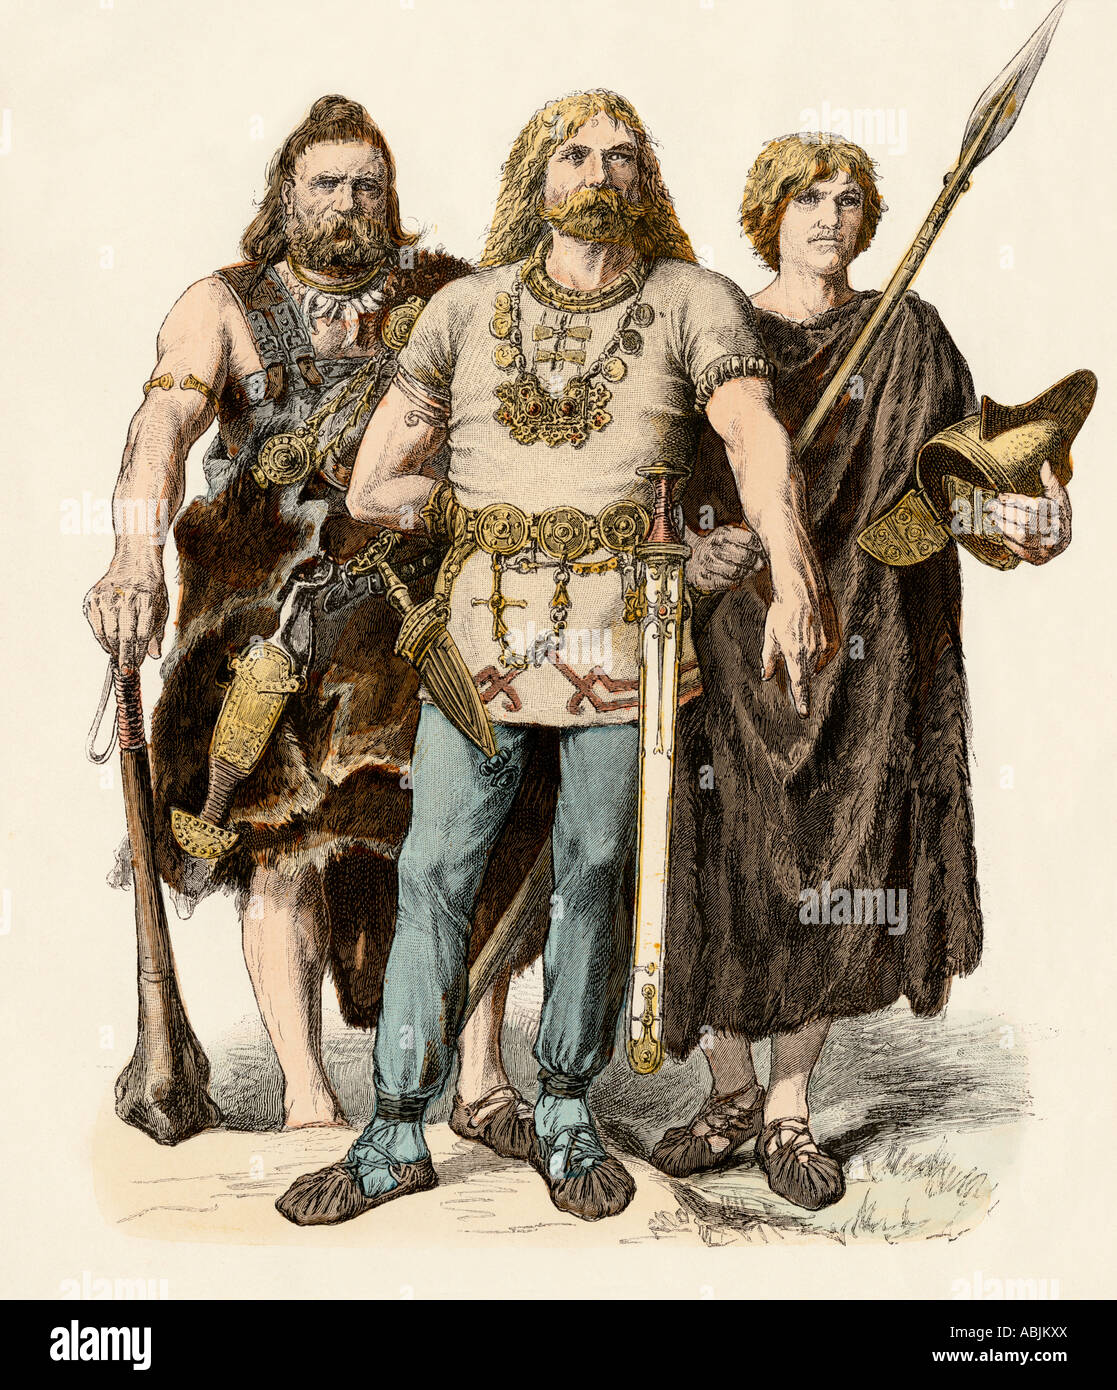 European tribesmen known as barbarians to the Romans circa 50 AD. Hand-colored print Stock Photo